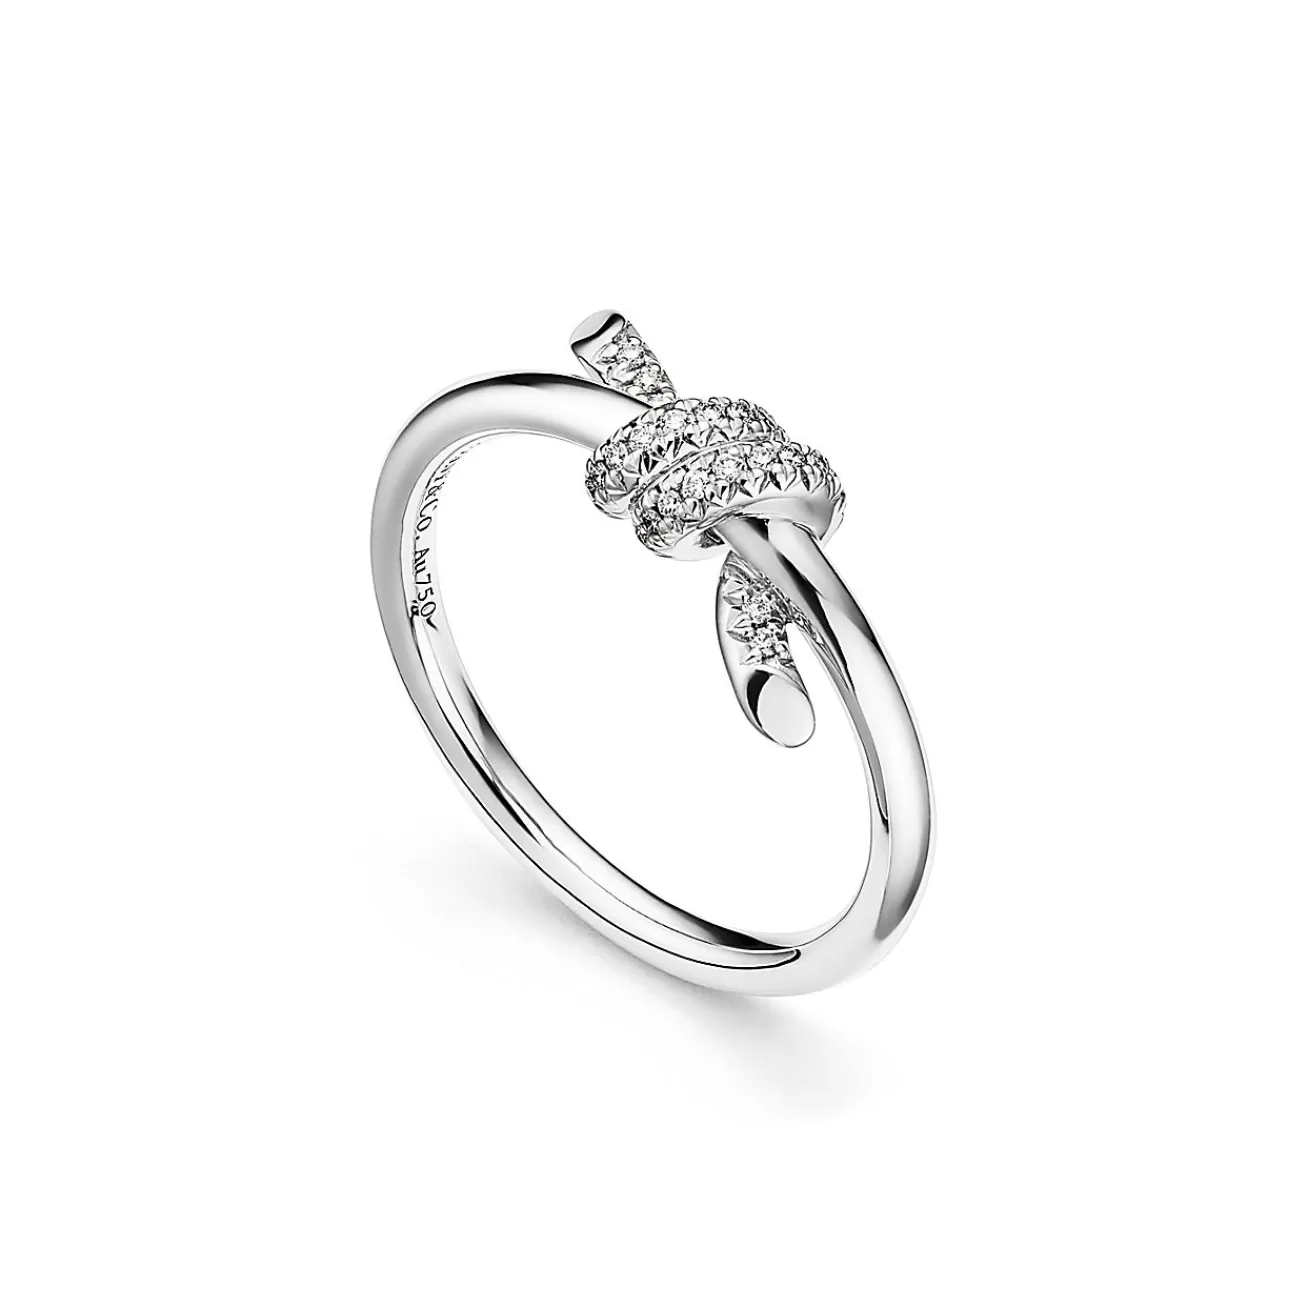 Tiffany & Co. Tiffany Knot Ring in White Gold with Diamonds | ^ Rings | Diamond Jewelry